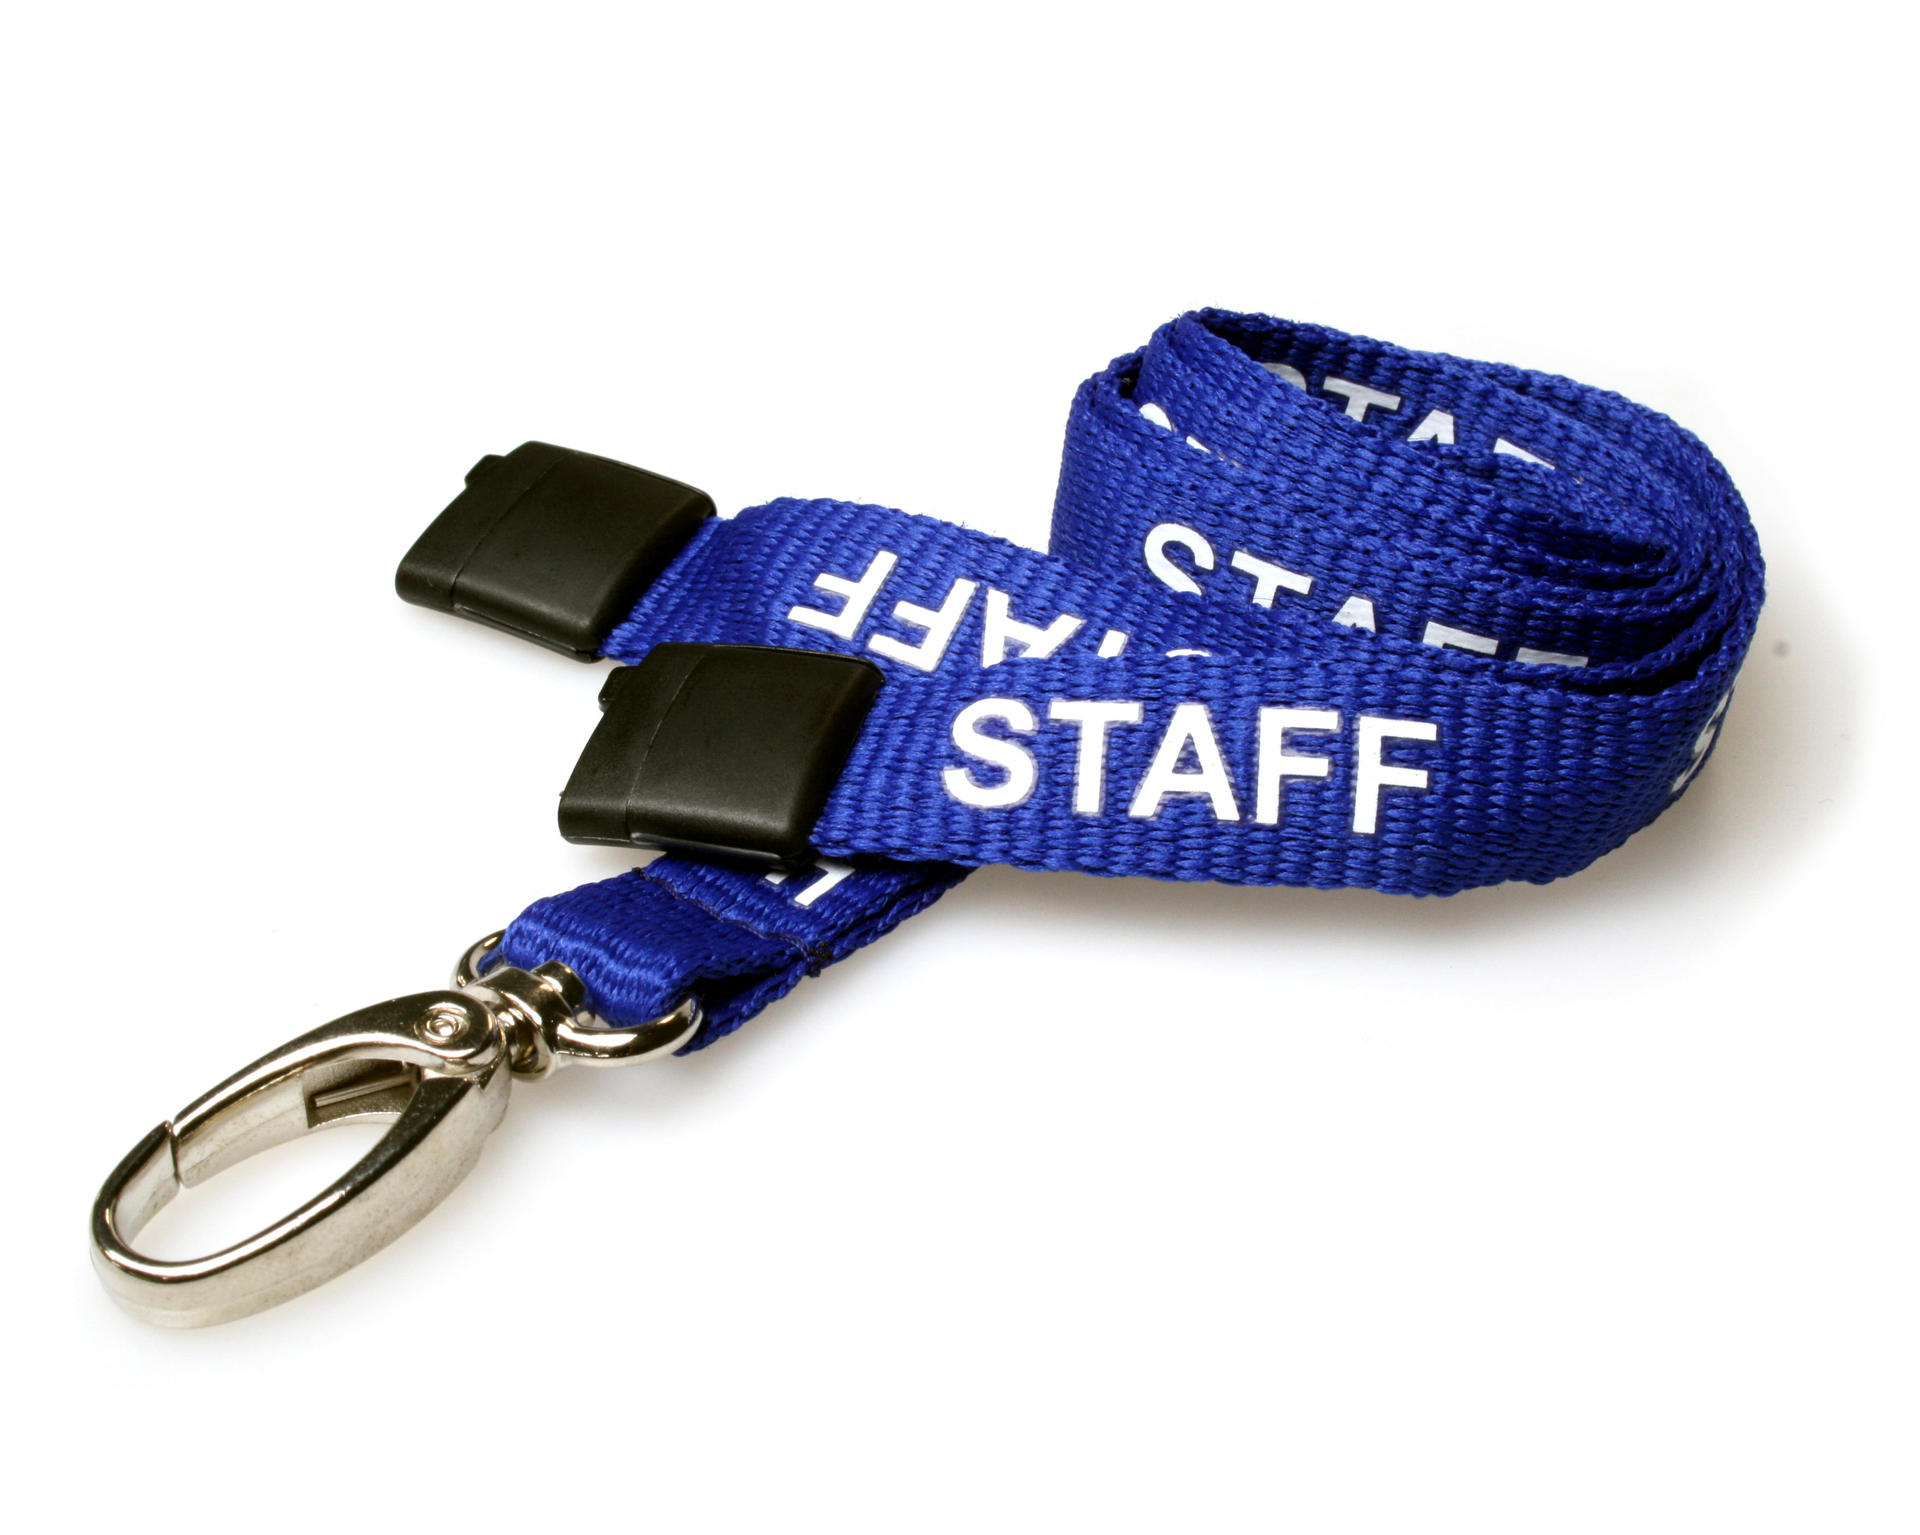 Advantages of Lanyard in Security Service